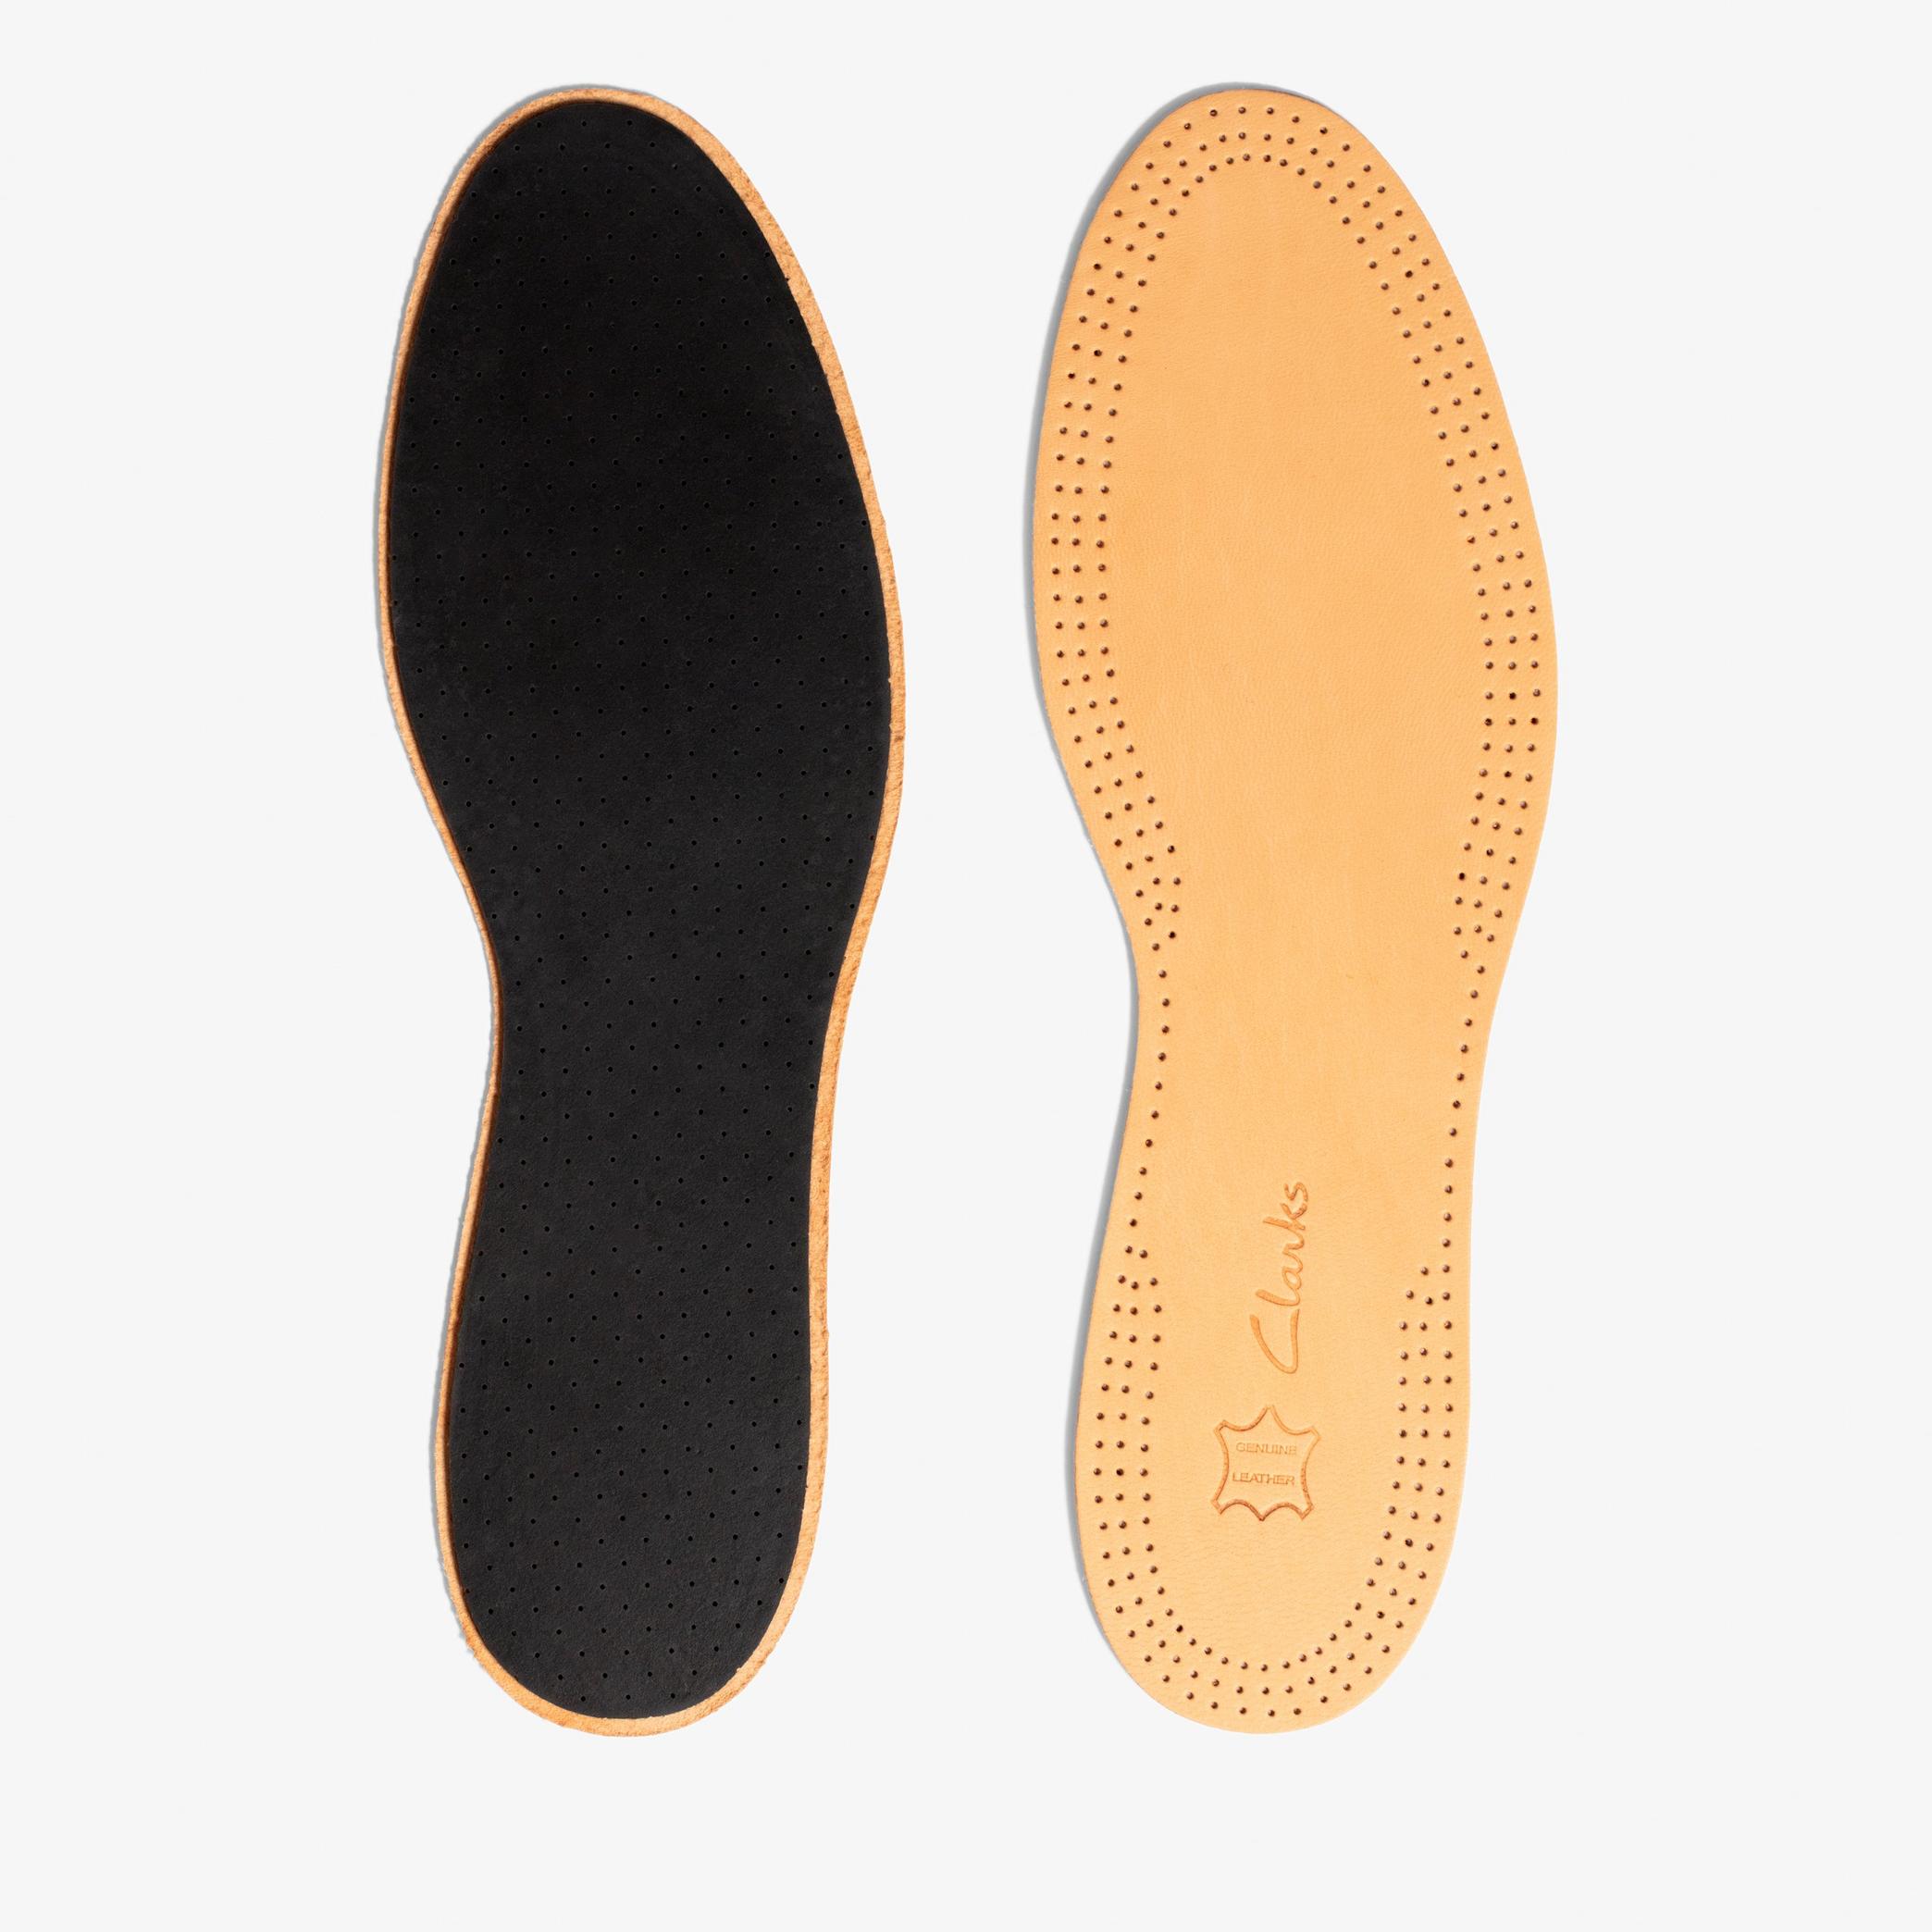 Leather insole size 10  Insoles, view 2 of 3